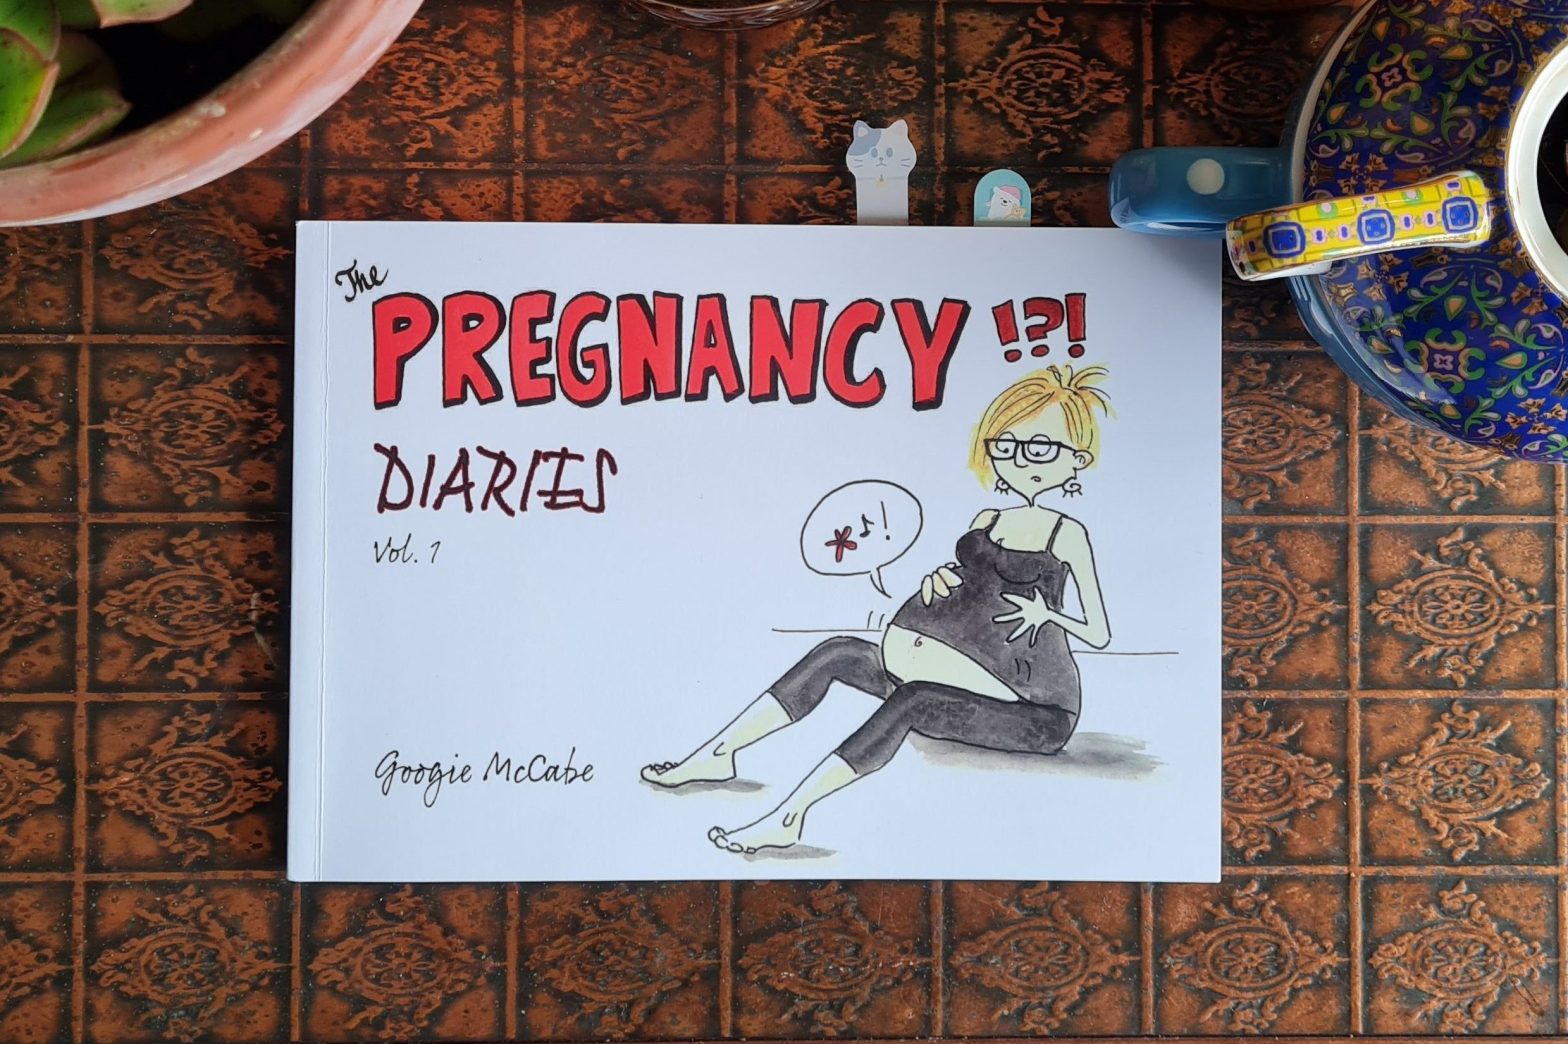 Book Review: The Pregnancy Diaries Vol. 1 by Googie McCabe